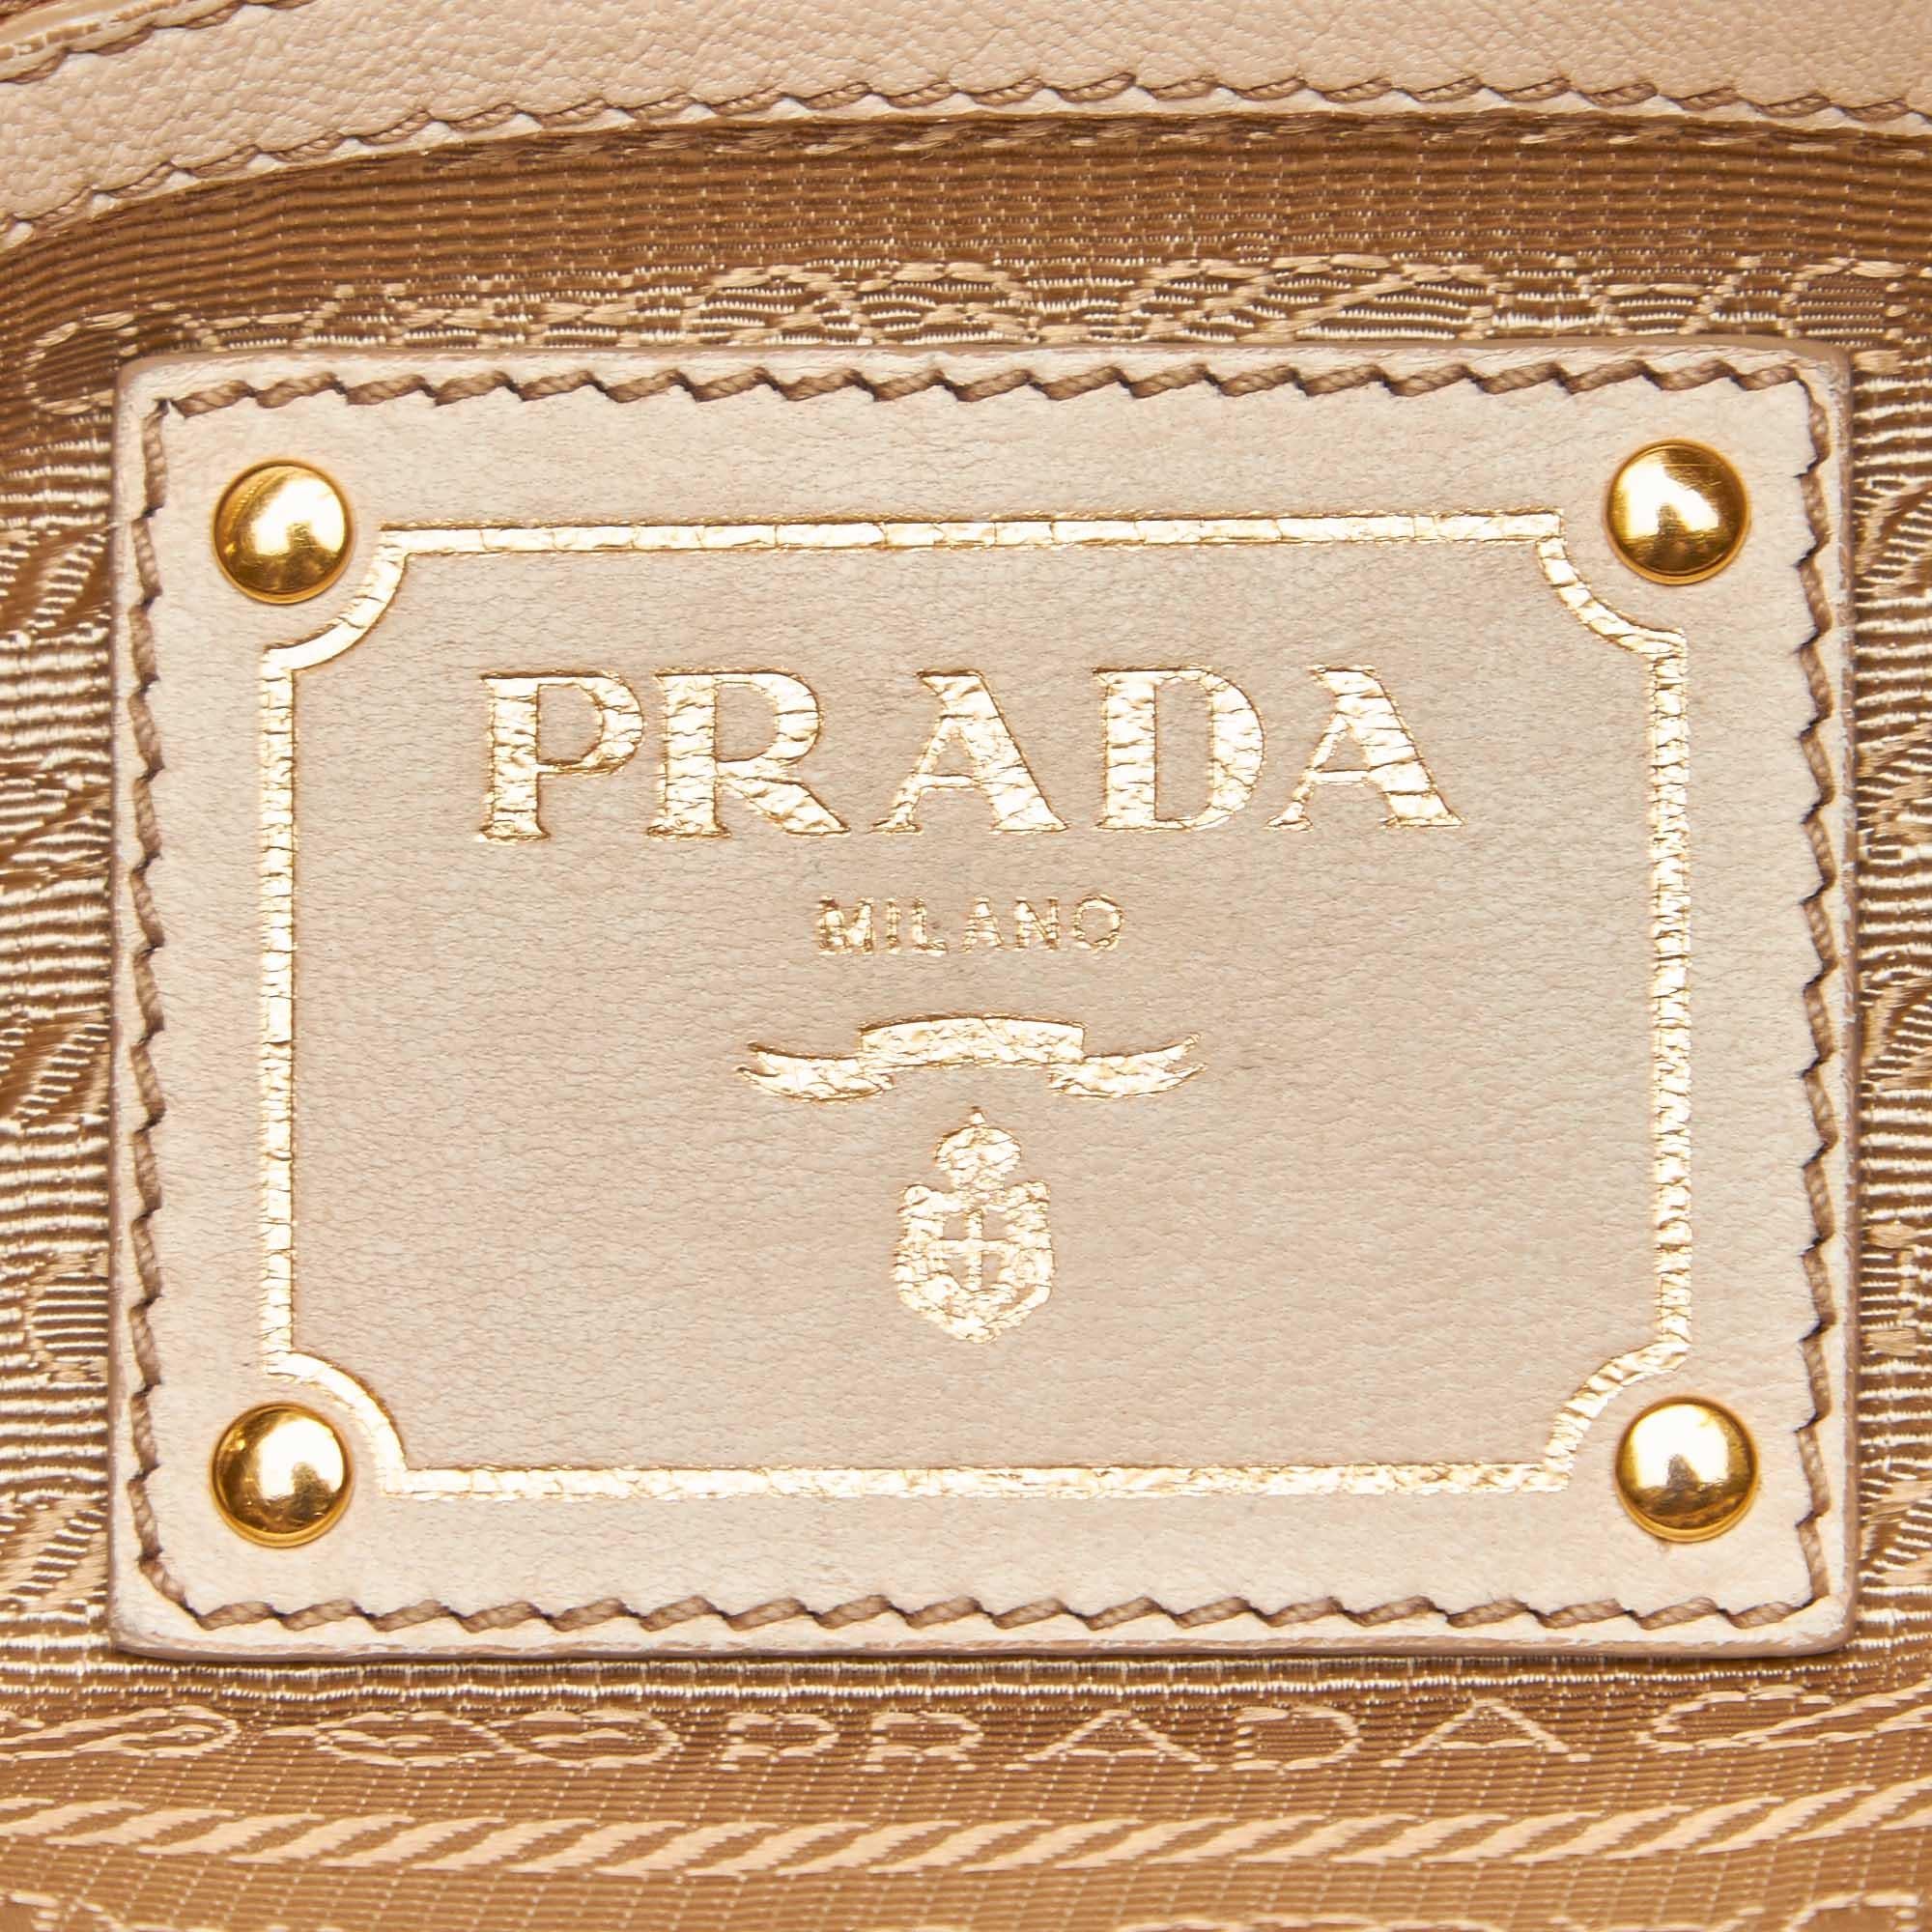 Vintage Authentic Prada Leather Gathered Shoulder Bag w Authenticity Card  1